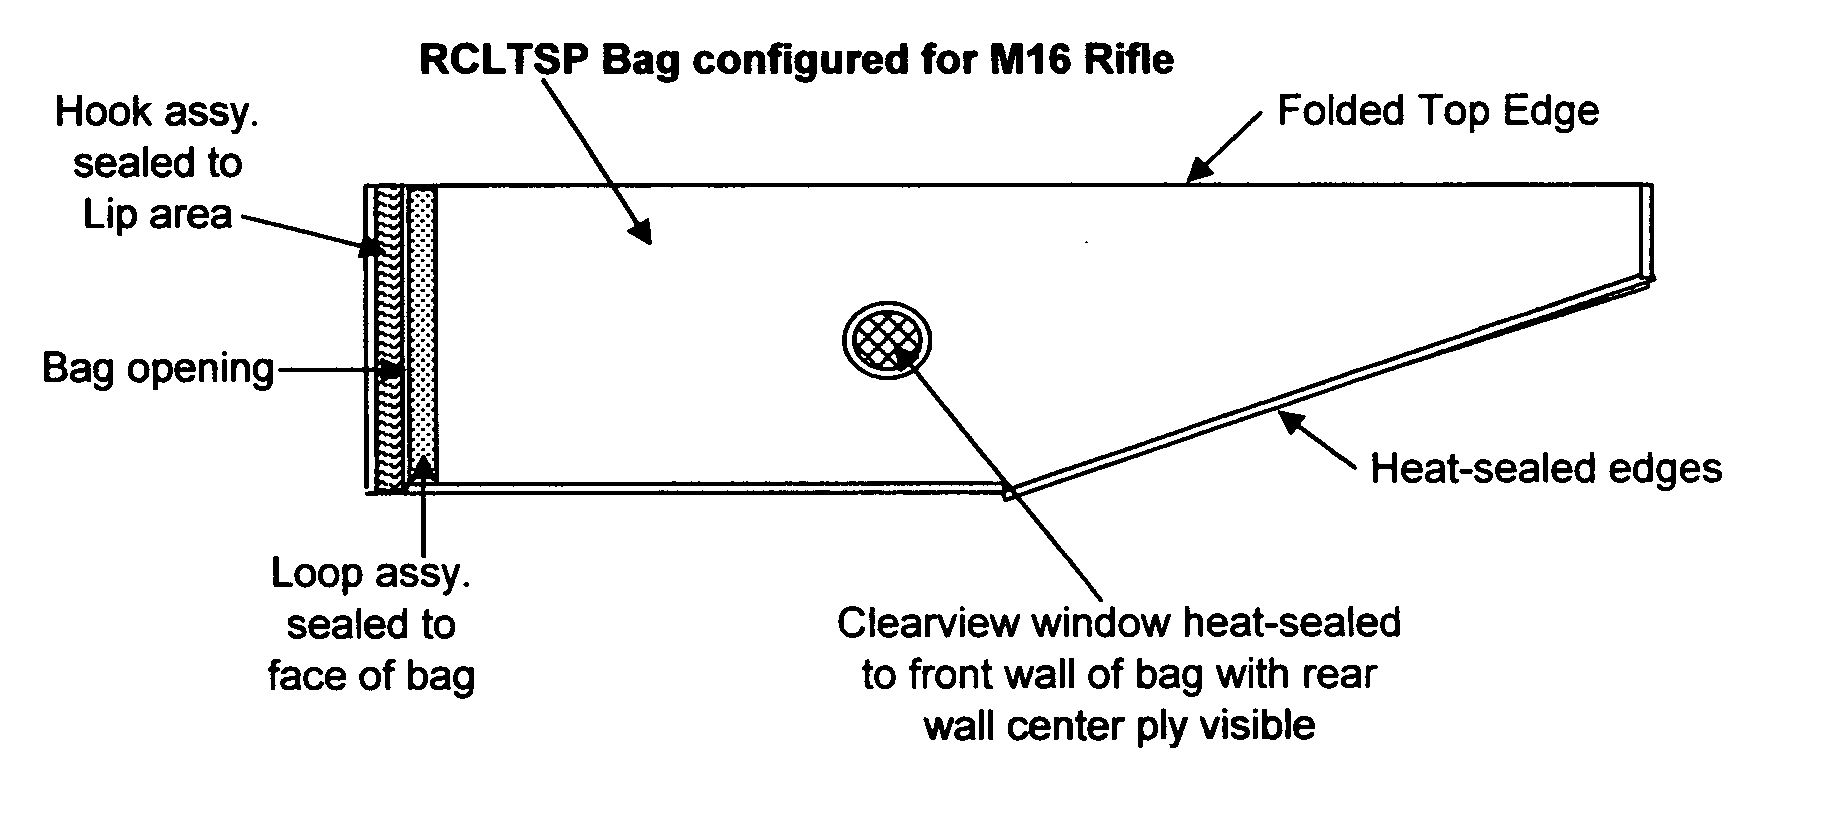 Re-closable Long Term Storage / Preservation Bag (RCLTSP bag); for the prevention of corrosion on military and / or commercial weaponry